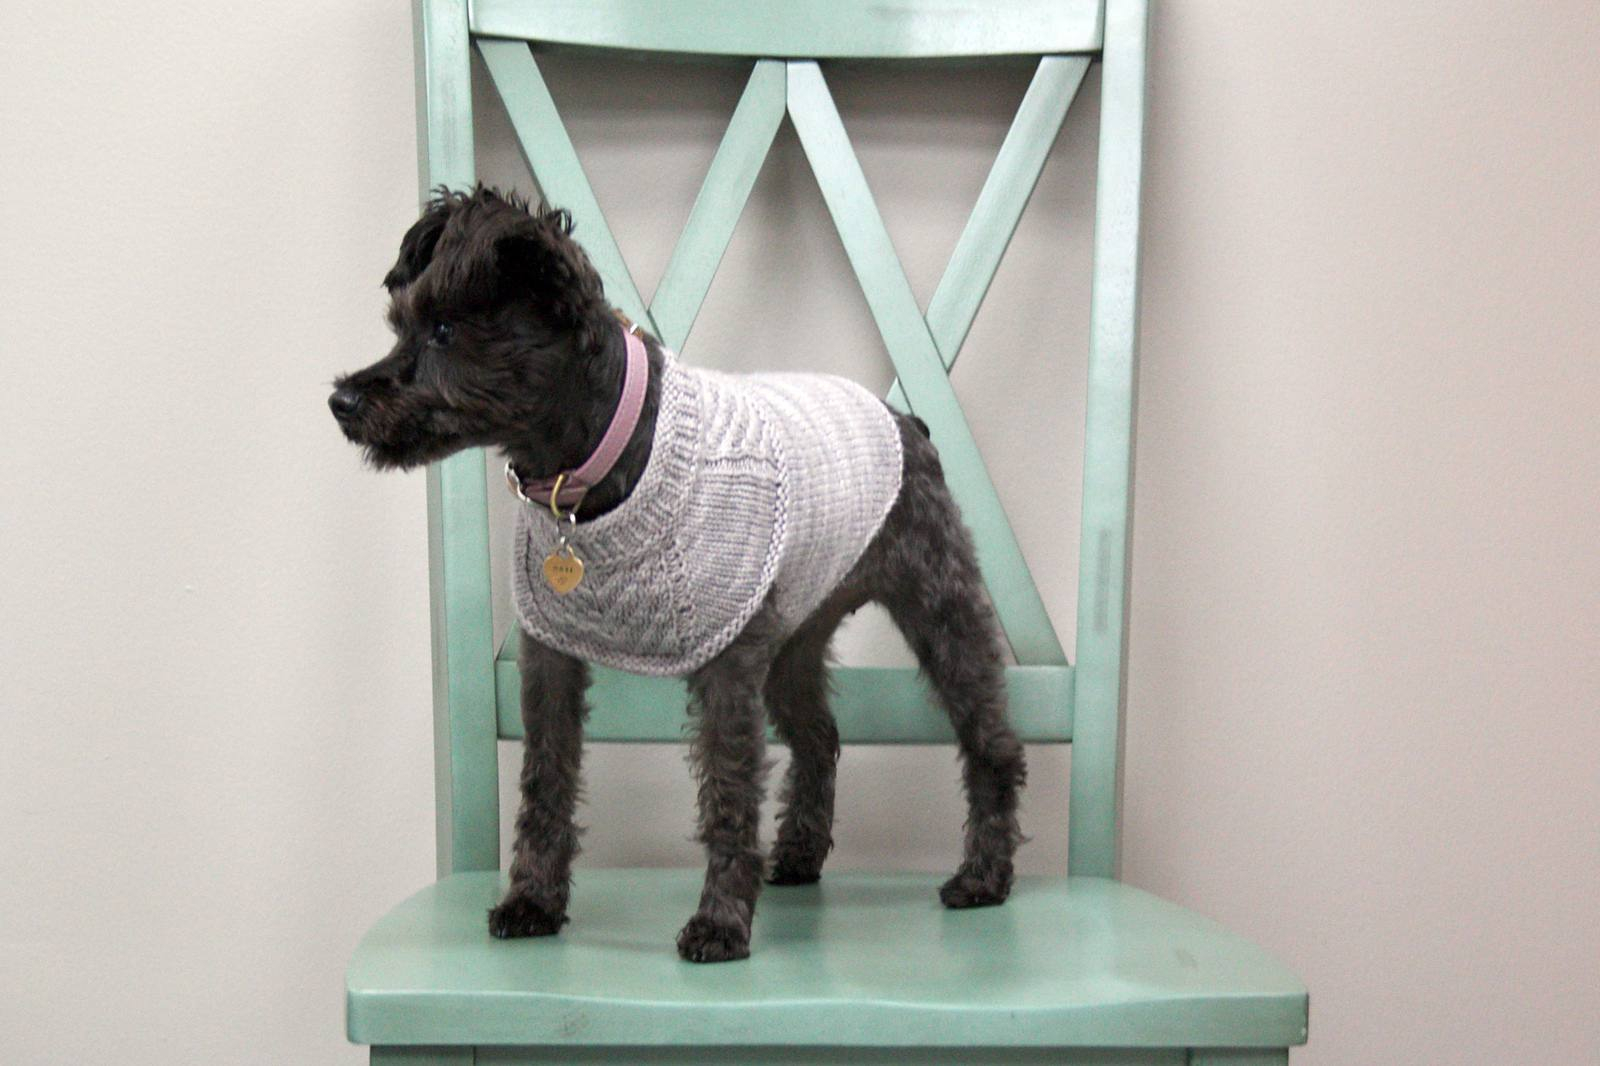 Dog Sweater Knitting Patterns 12 Dog Sweaters And Other Knitting Patterns For Pups